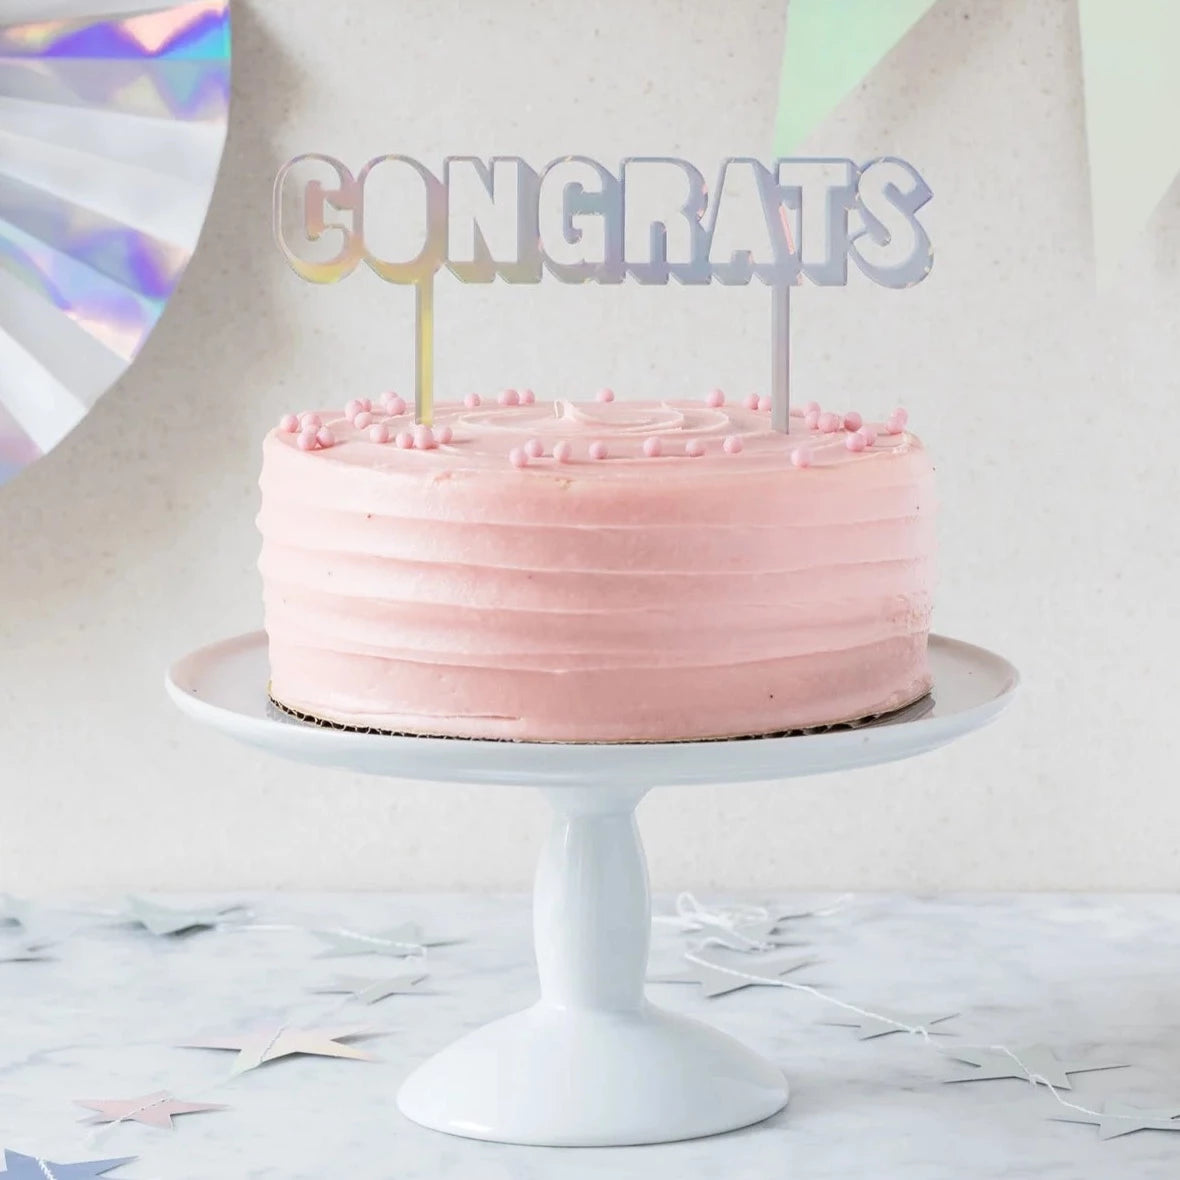 Congrats Confetti Single Layer Cake - The Dessert Stand Westminster CO  Serving Greater Denver Metro Area